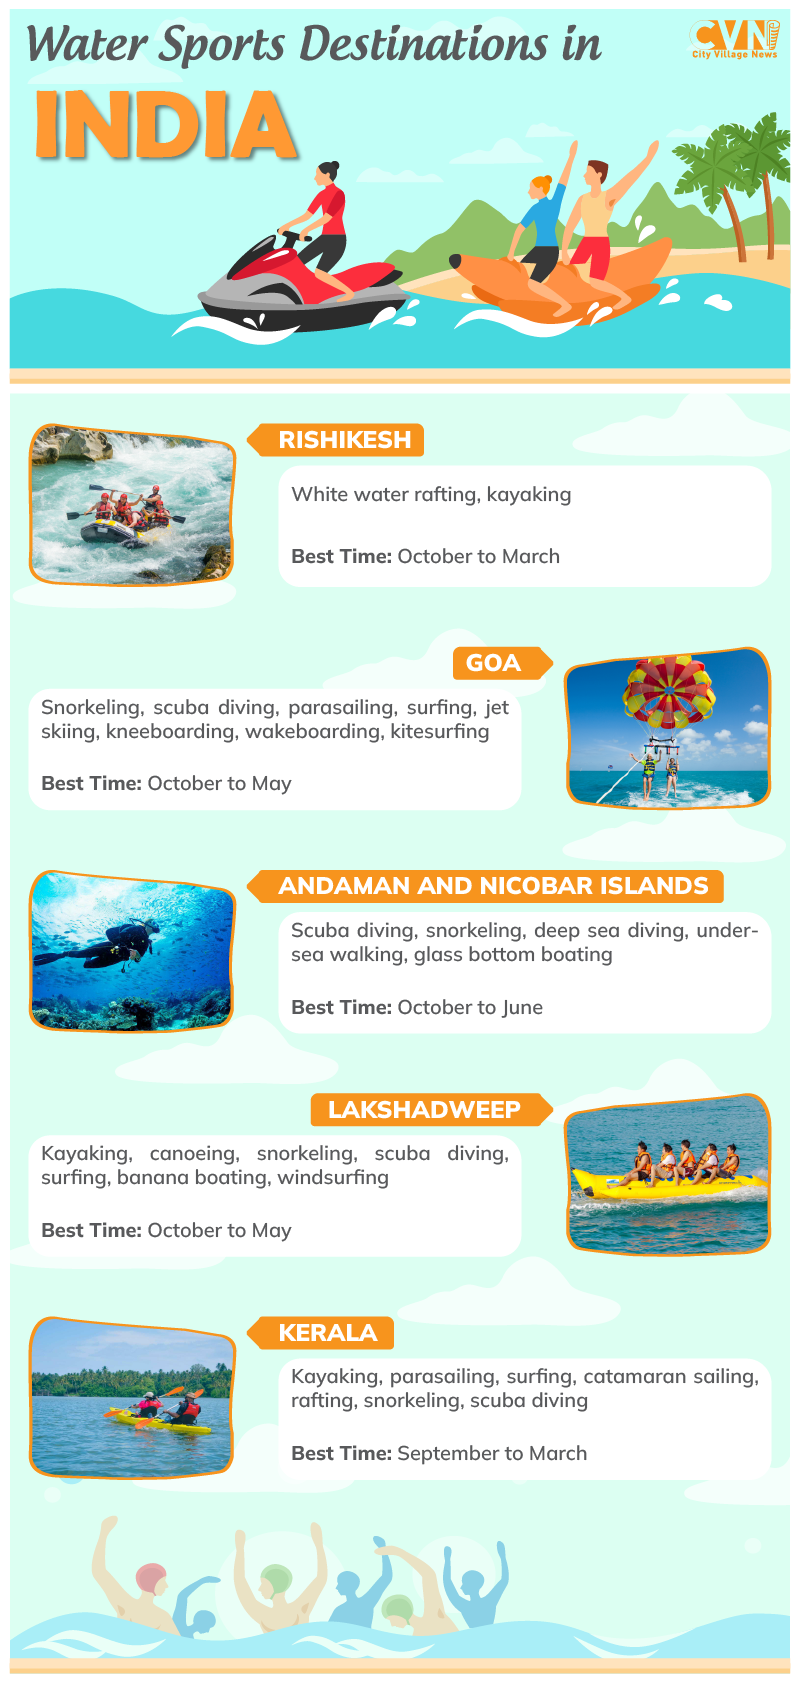 Water Sports Destinations in India